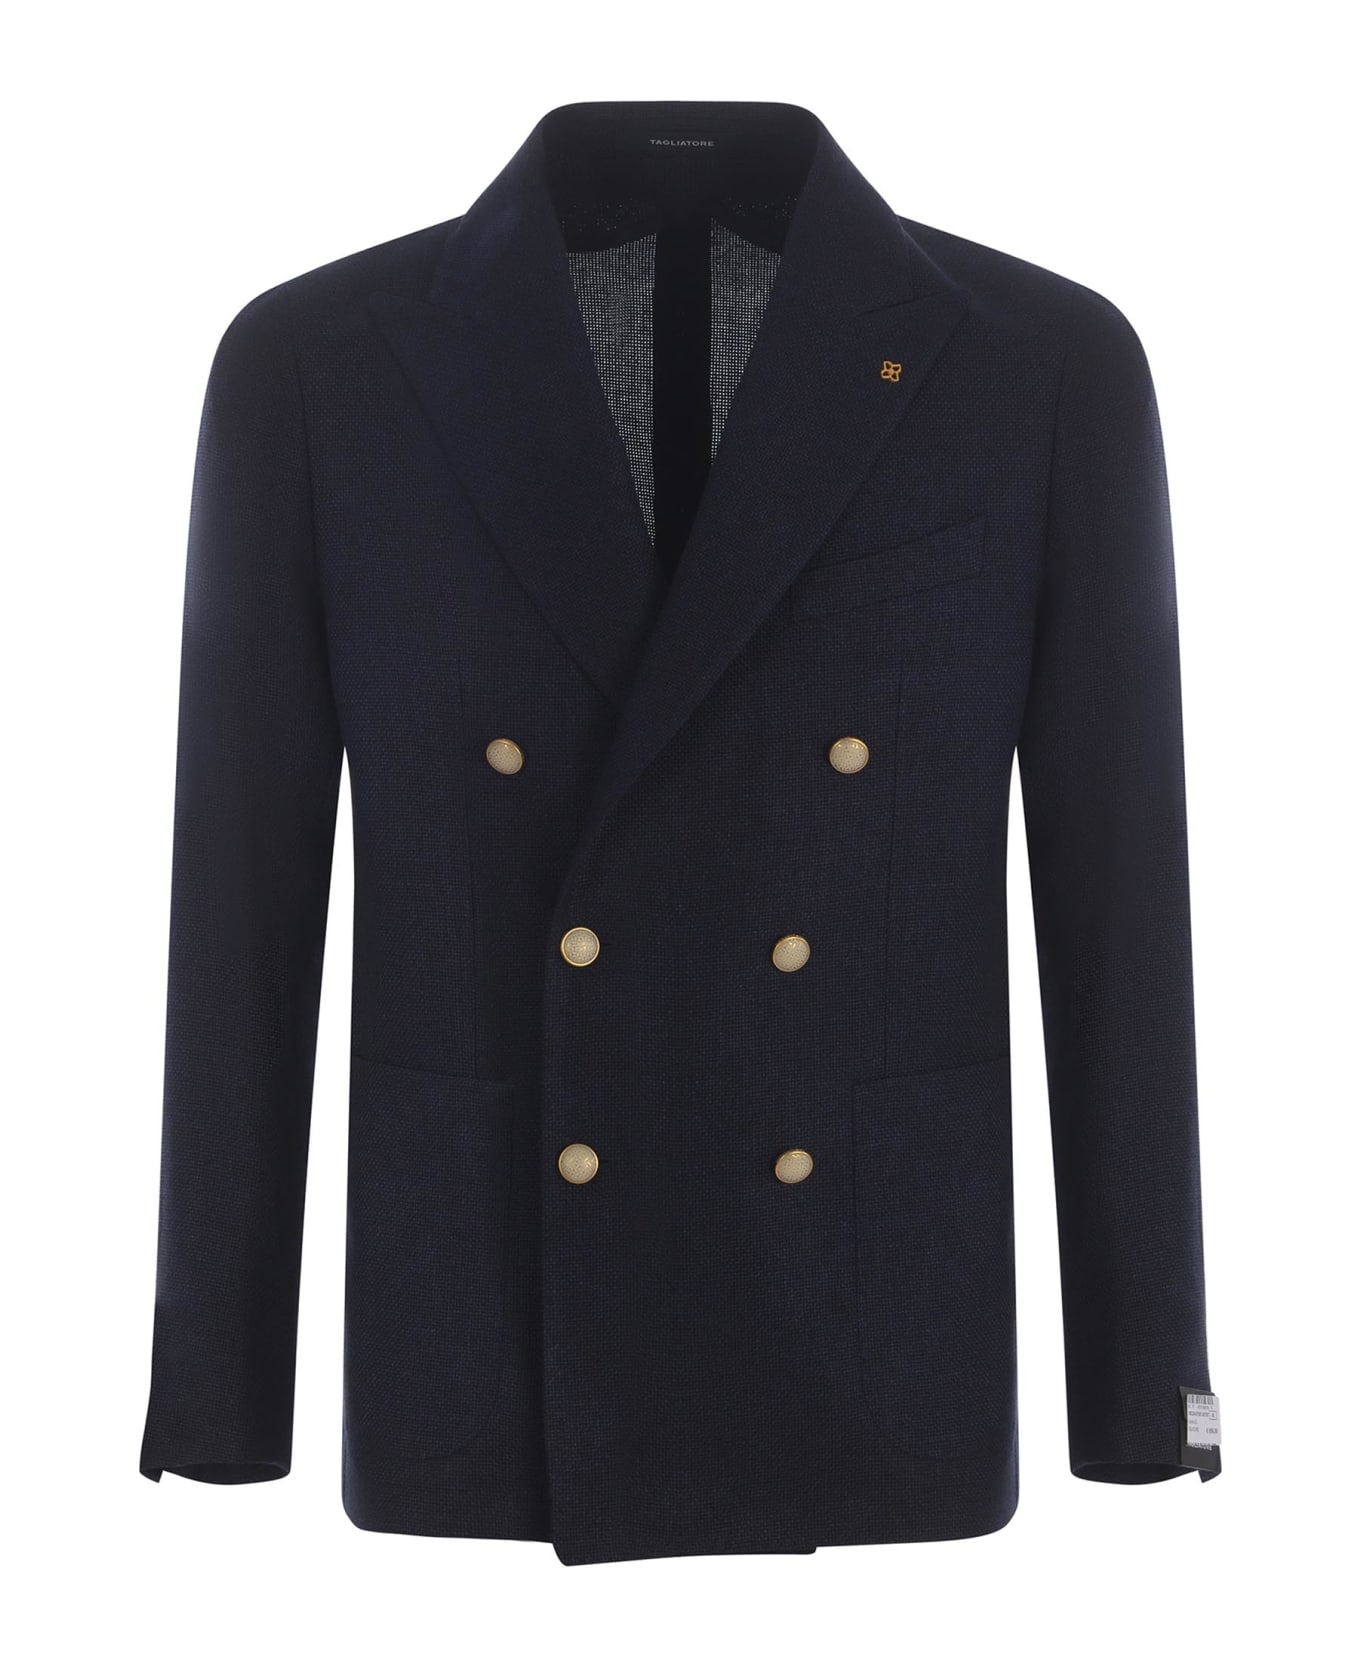 Tagliatore Double-breasted Jacket Tagliatore Made Of Virgin Wool And Linen Blend - Blu ブレザー